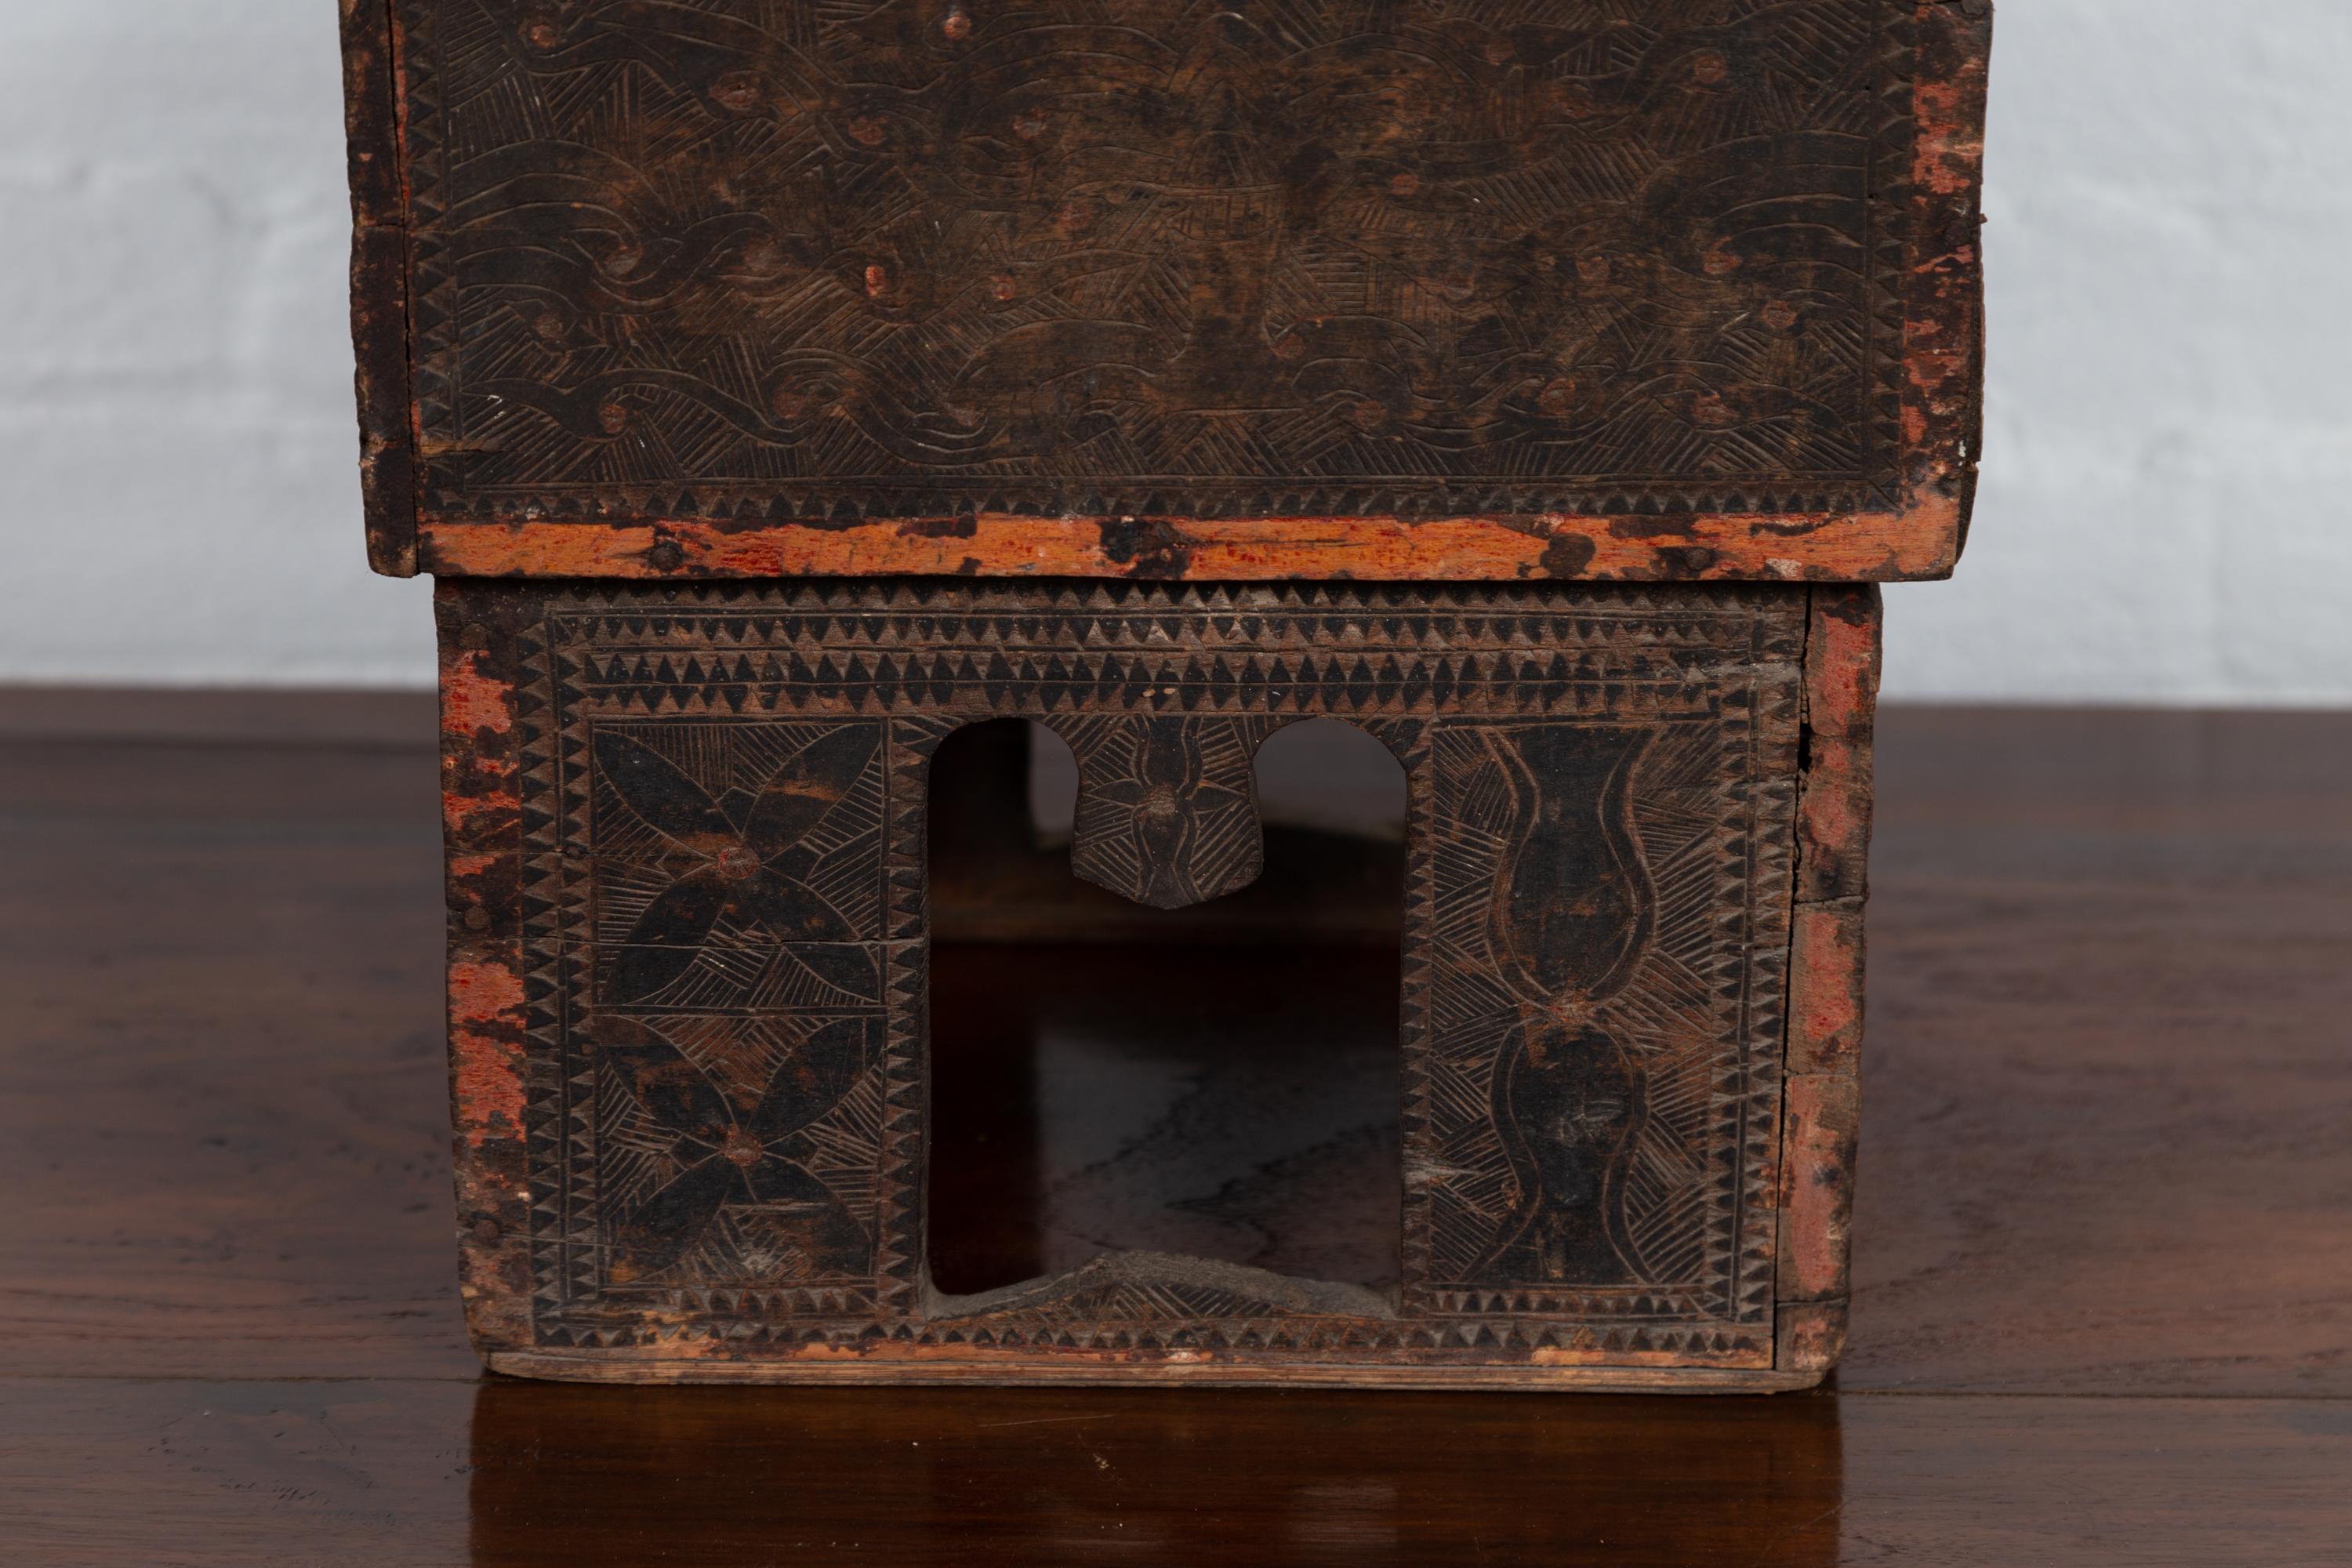 Antique Thai Rustic Wooden Betel Nut Box with Carved Décor and Pierced Motifs In Fair Condition For Sale In Yonkers, NY